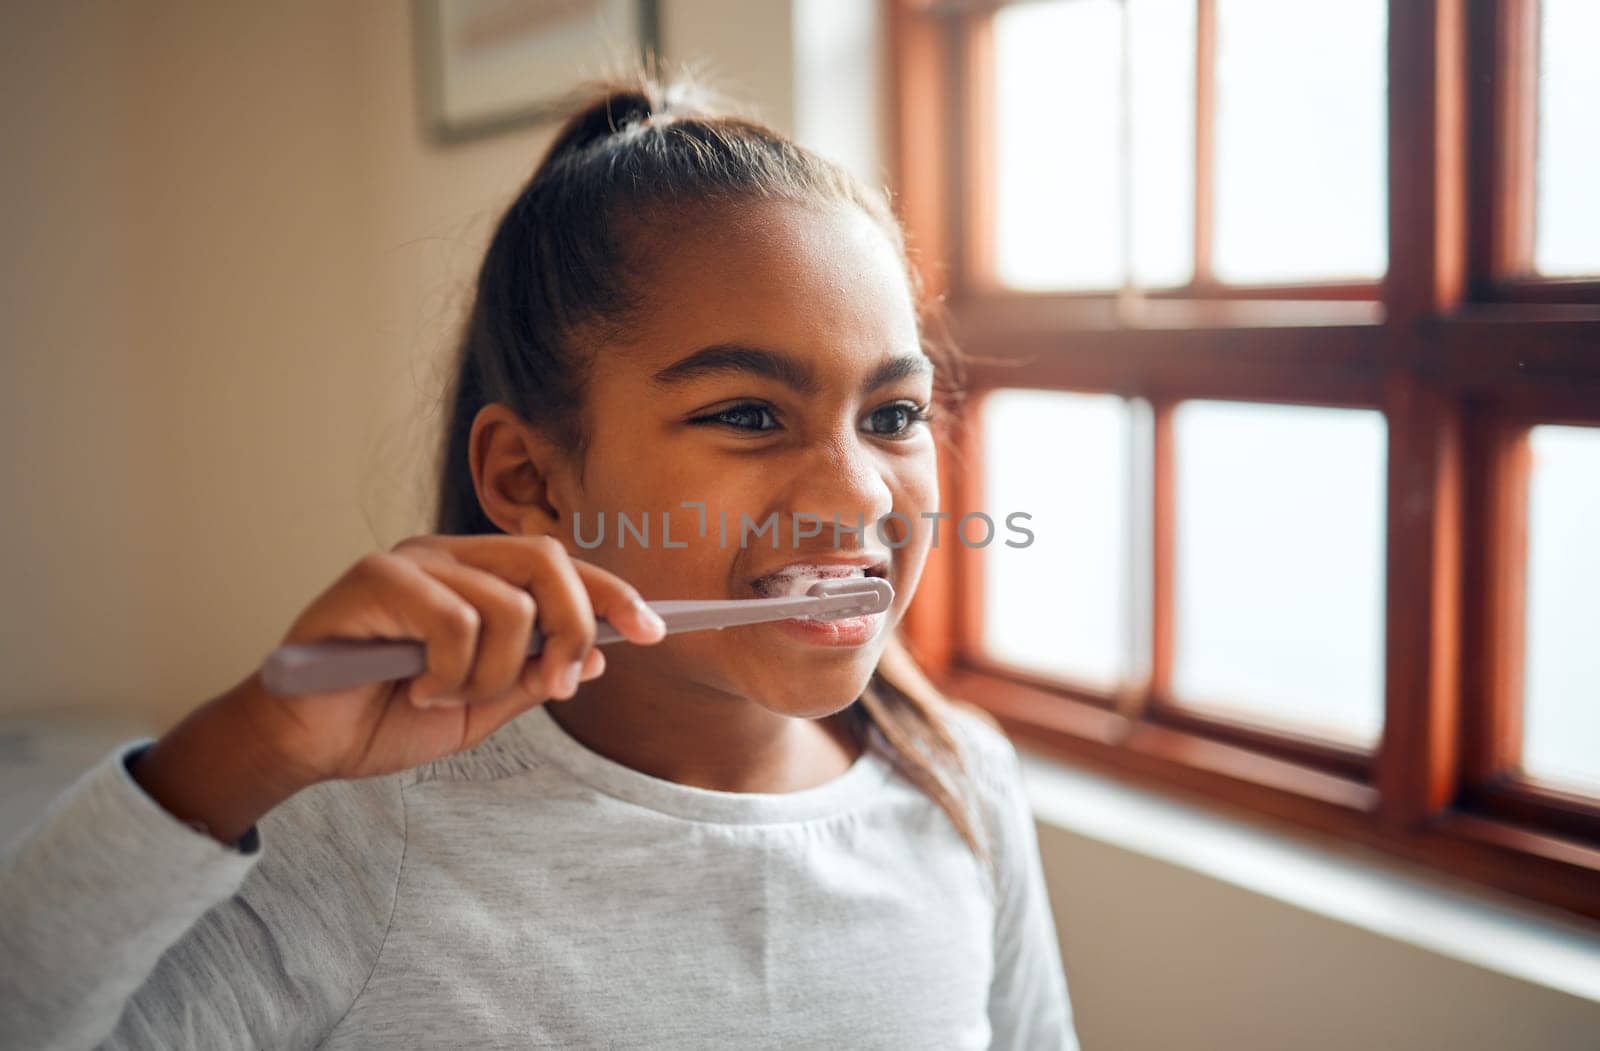 Girl brushing teeth, toothbrush for hygiene and clean mouth, fresh breath for oral care and dental health. Black child cleaning with toothpaste in bathroom, wellness at family home and healthy gums.